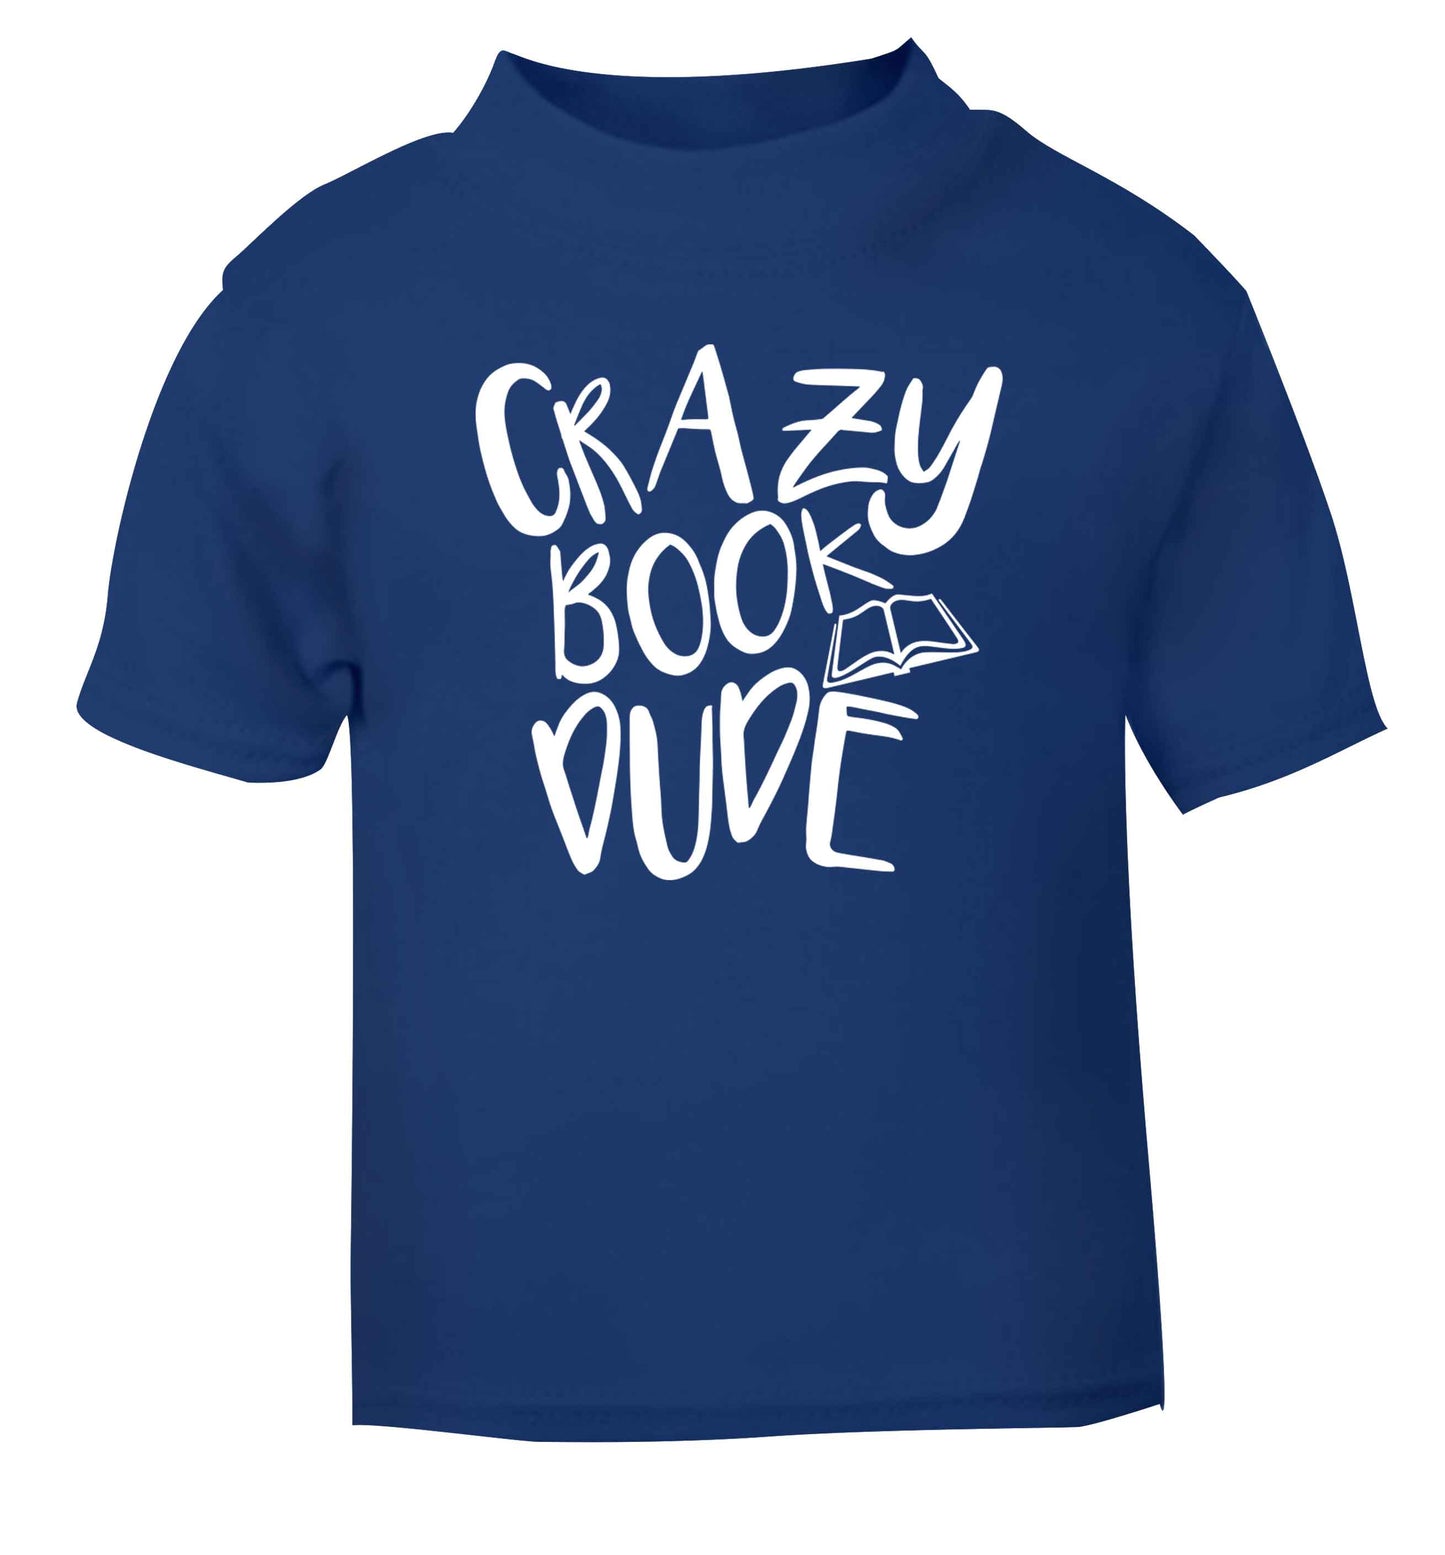 Crazy book dude blue Baby Toddler Tshirt 2 Years